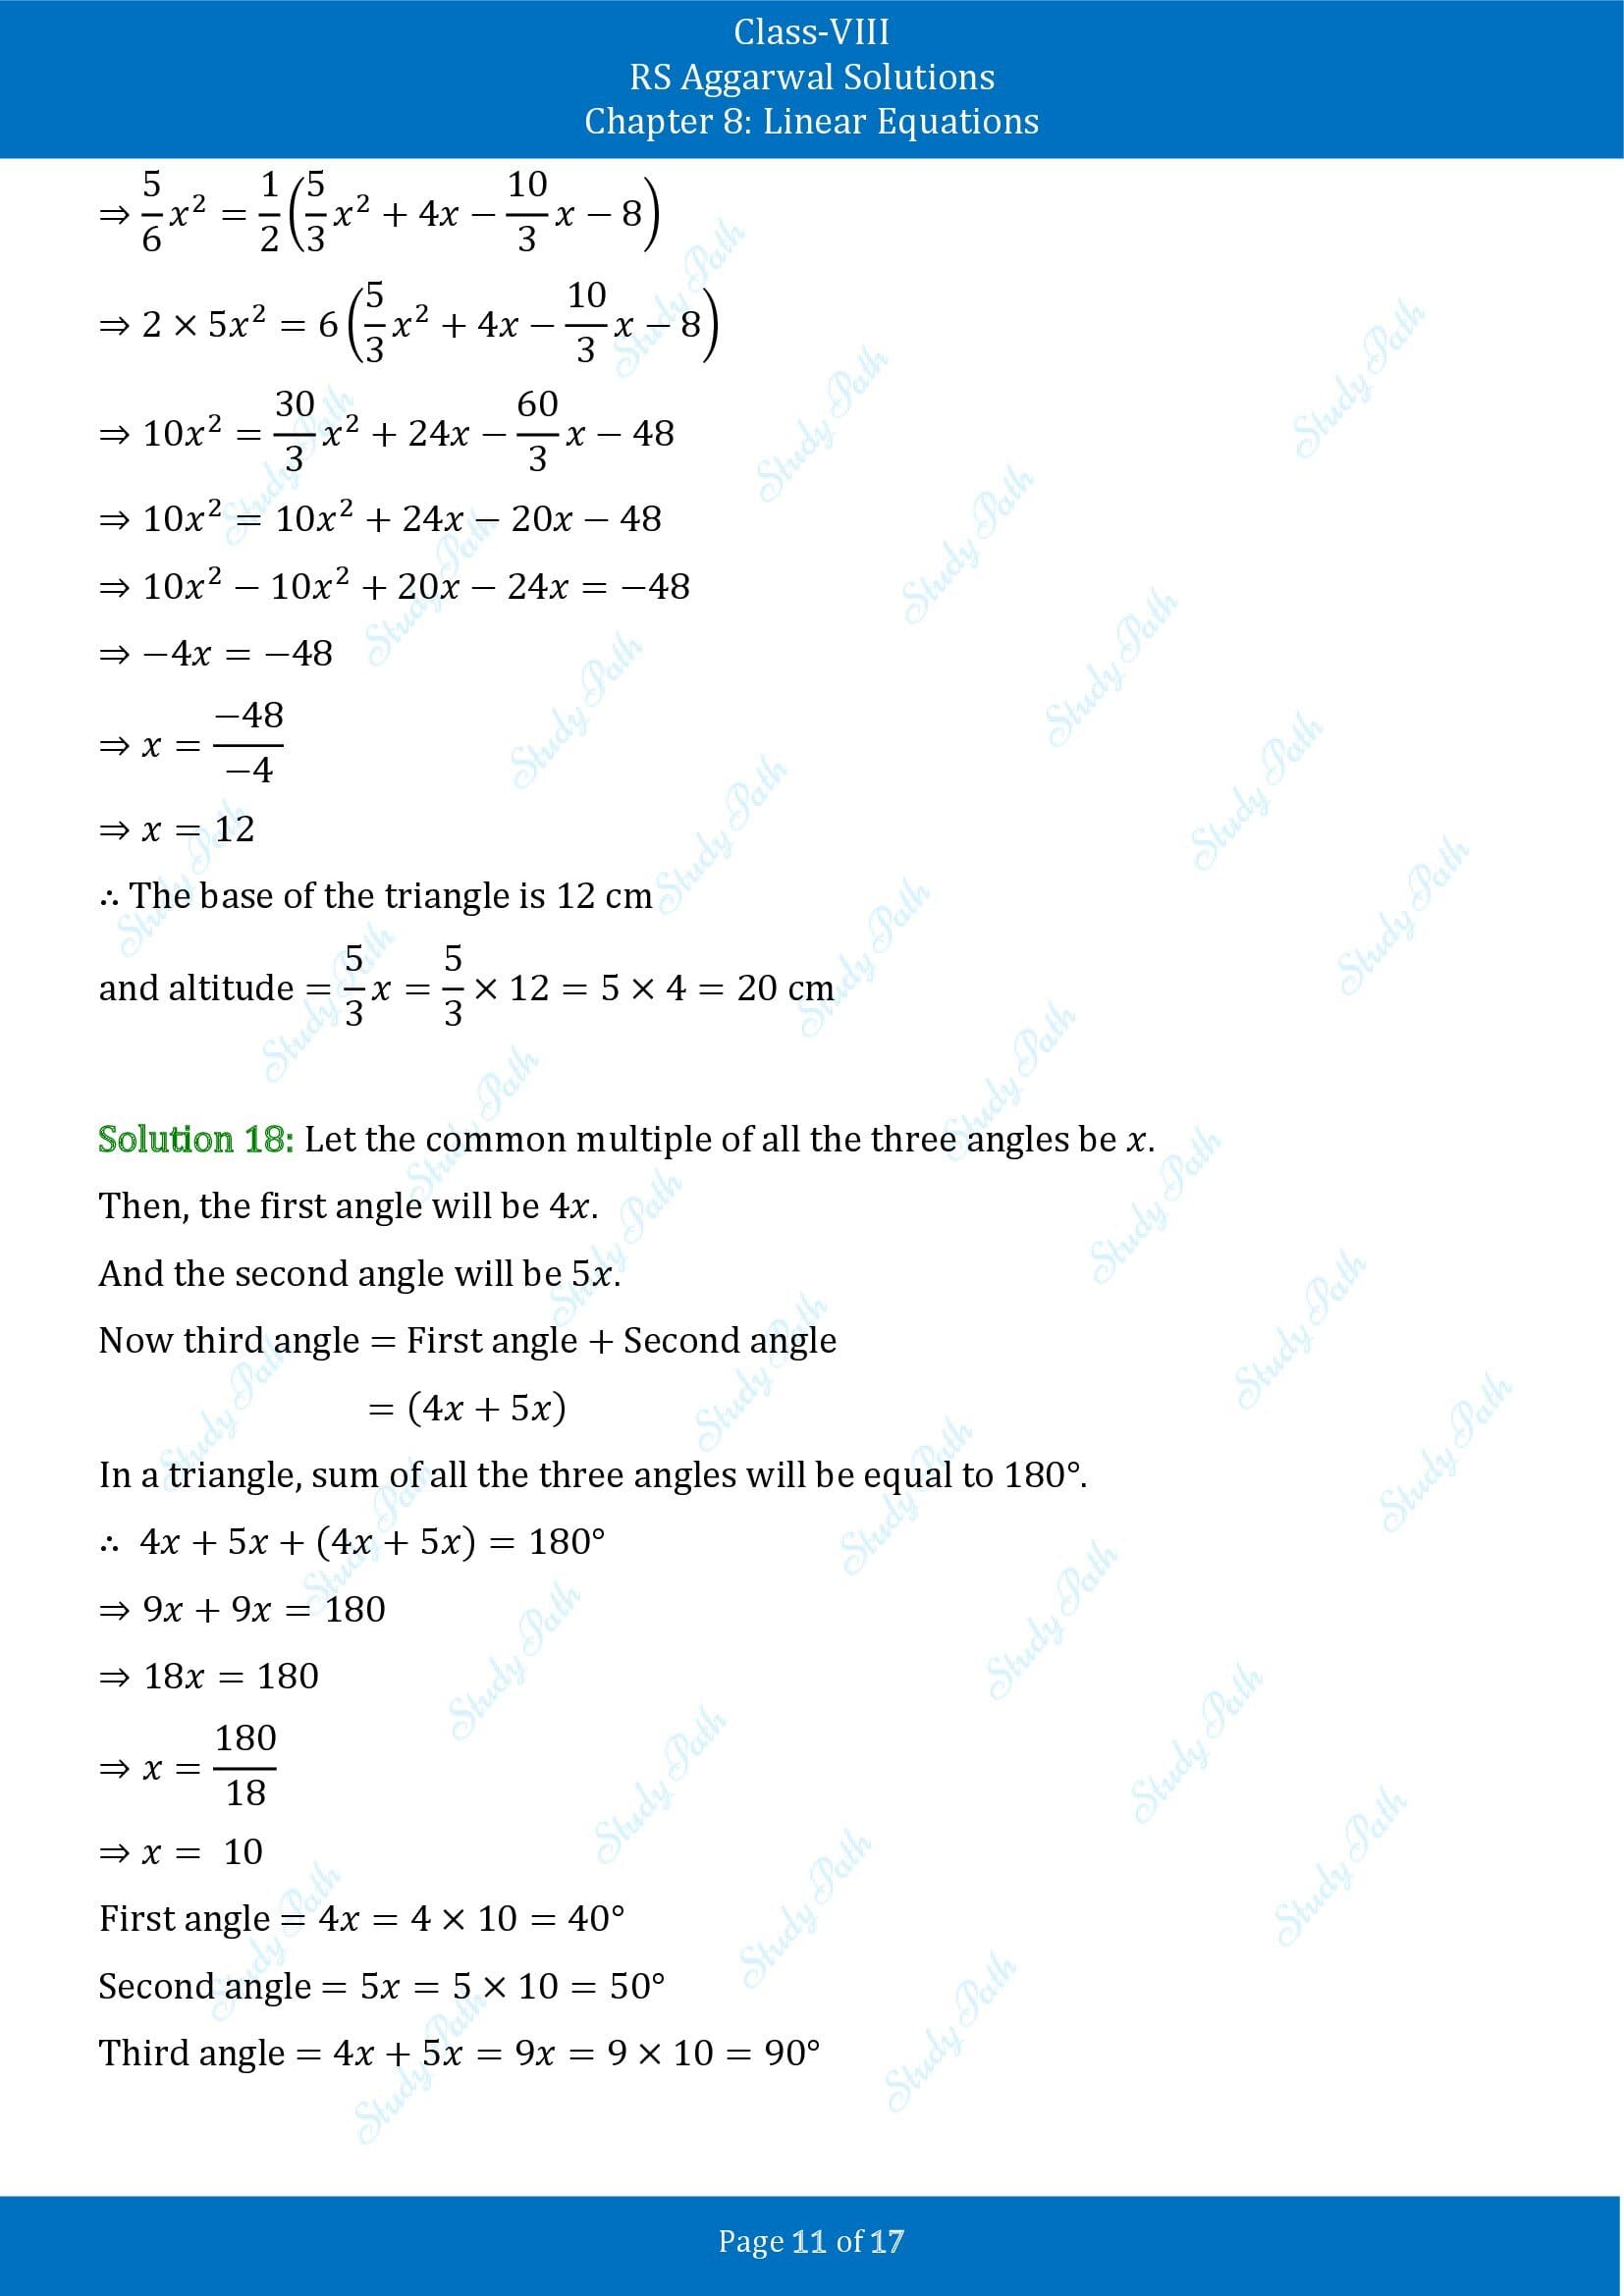 RS Aggarwal Solutions Class 8 Chapter 8 Linear Equations Exercise 8B 00011